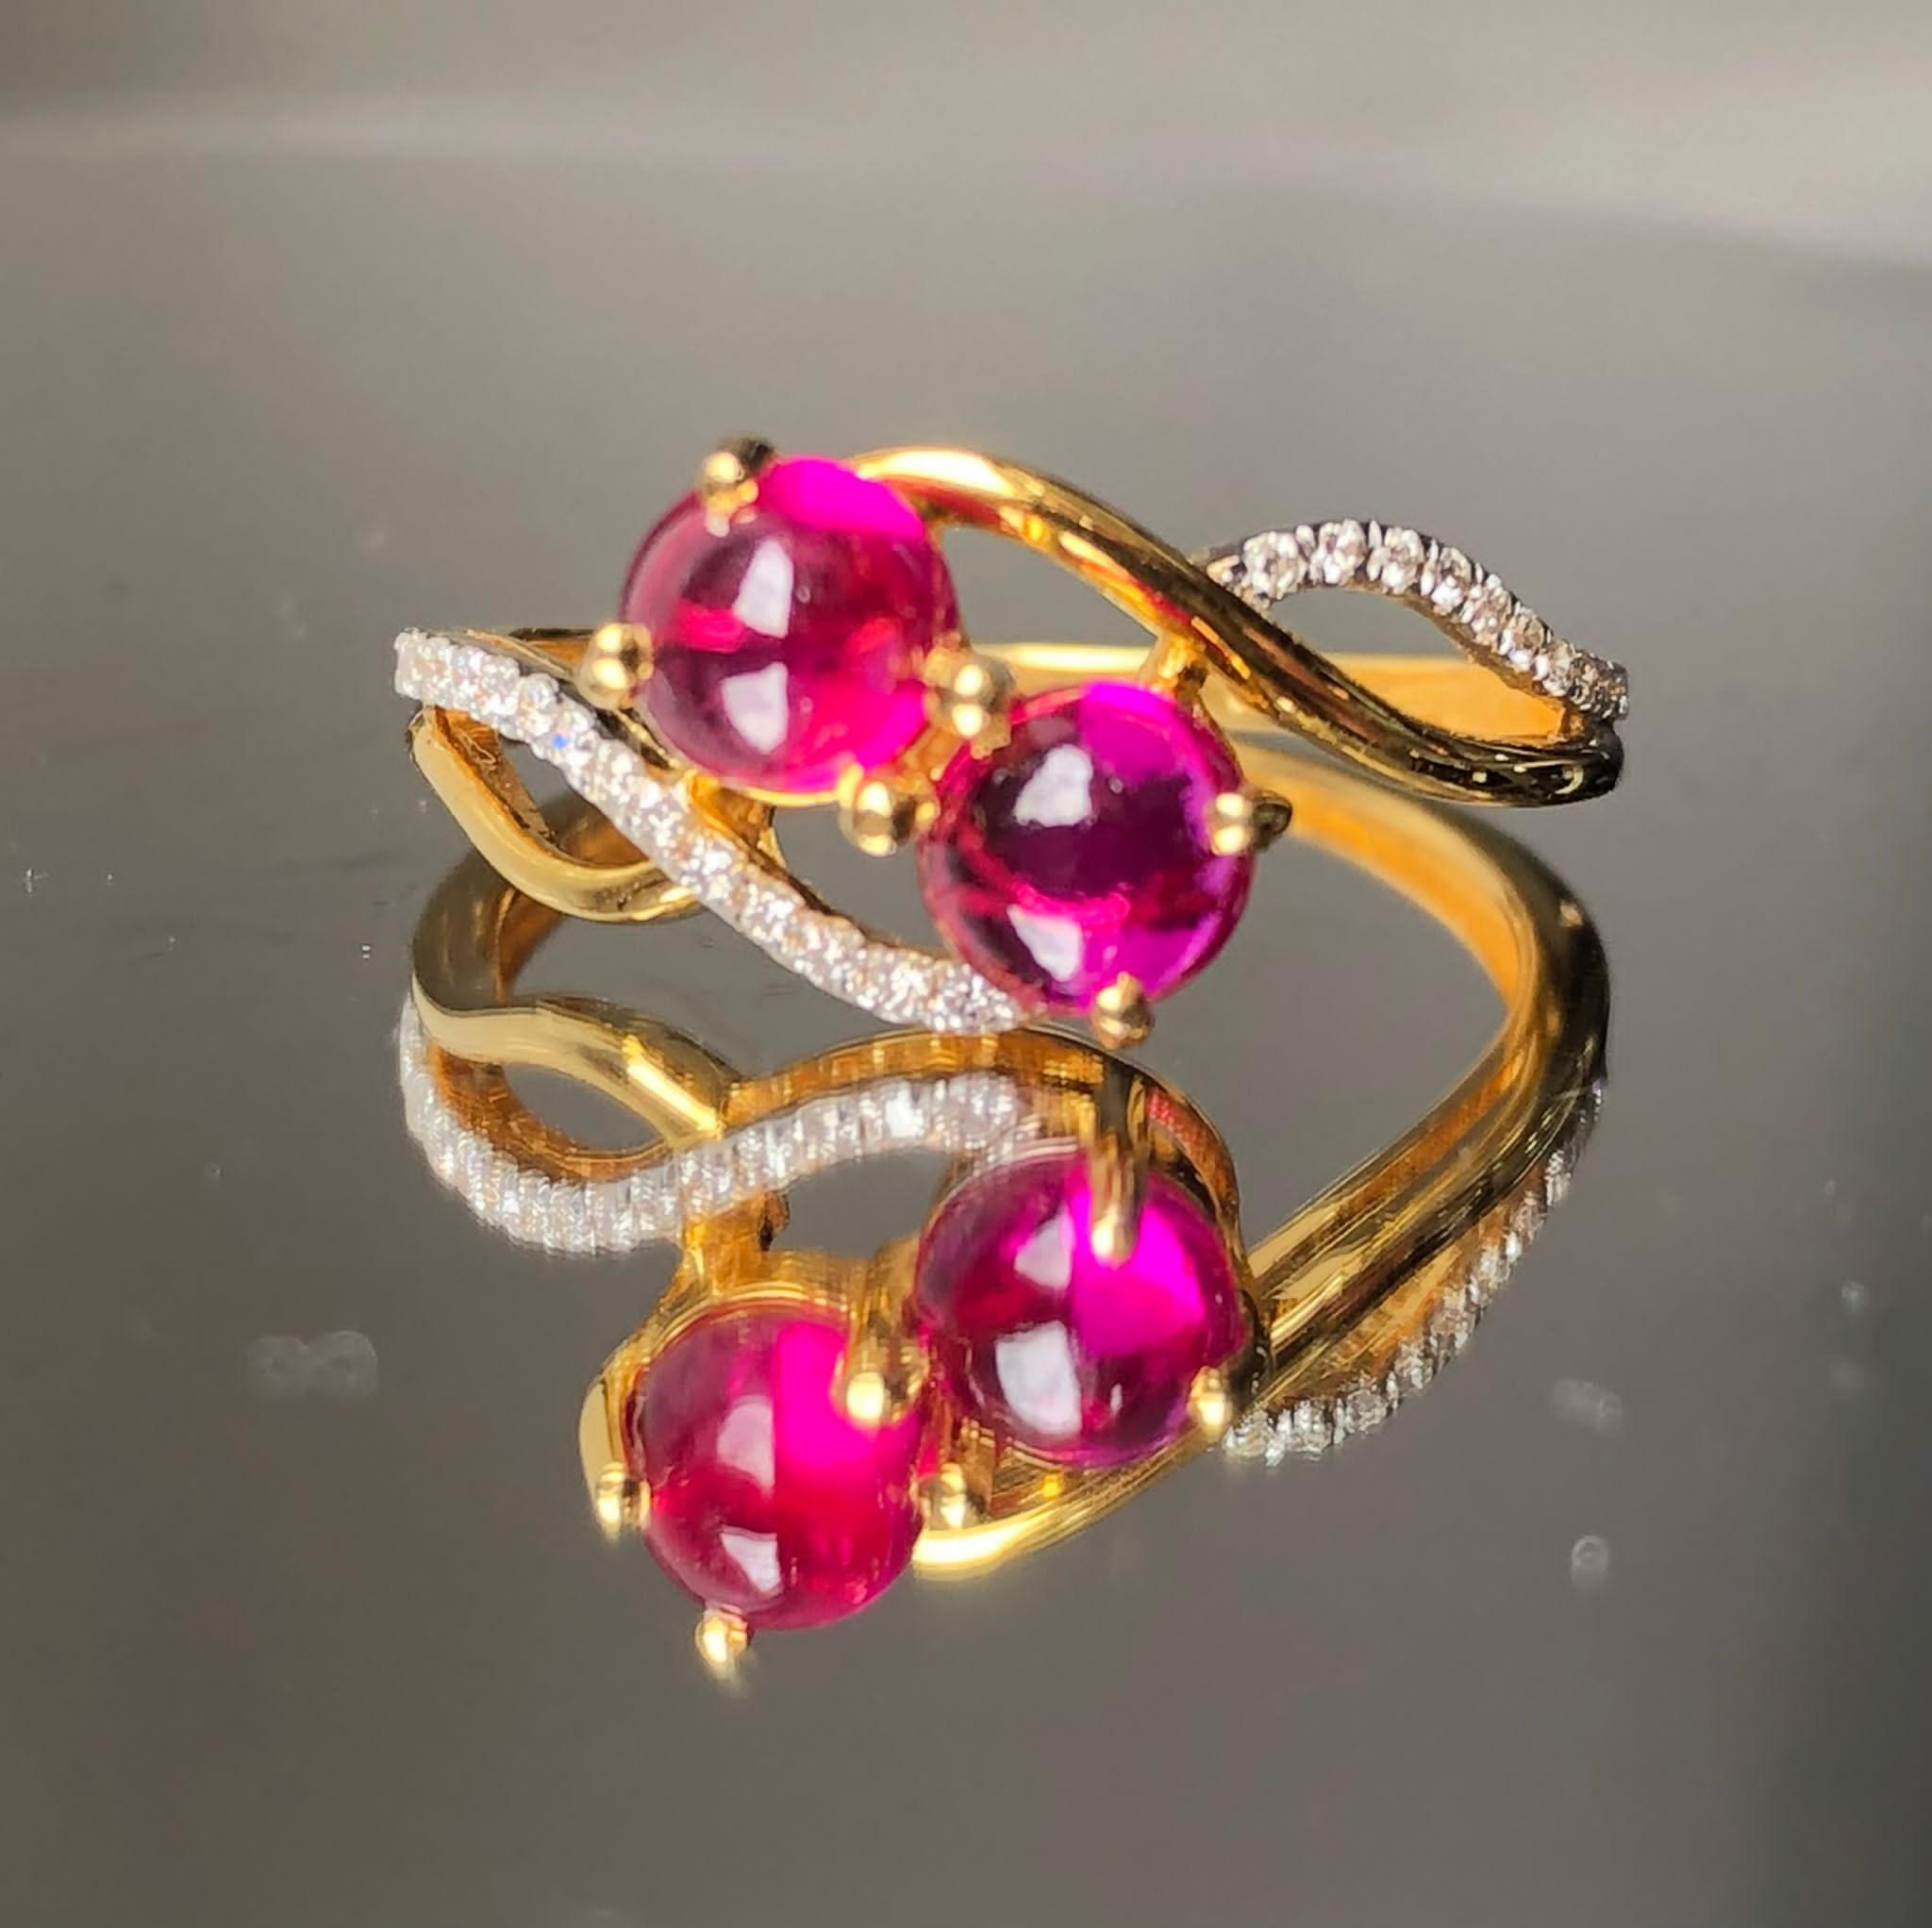 Beautiful Natural Unheated/untreated Burma Ruby With Diamonds & 18k Gold - Image 7 of 11